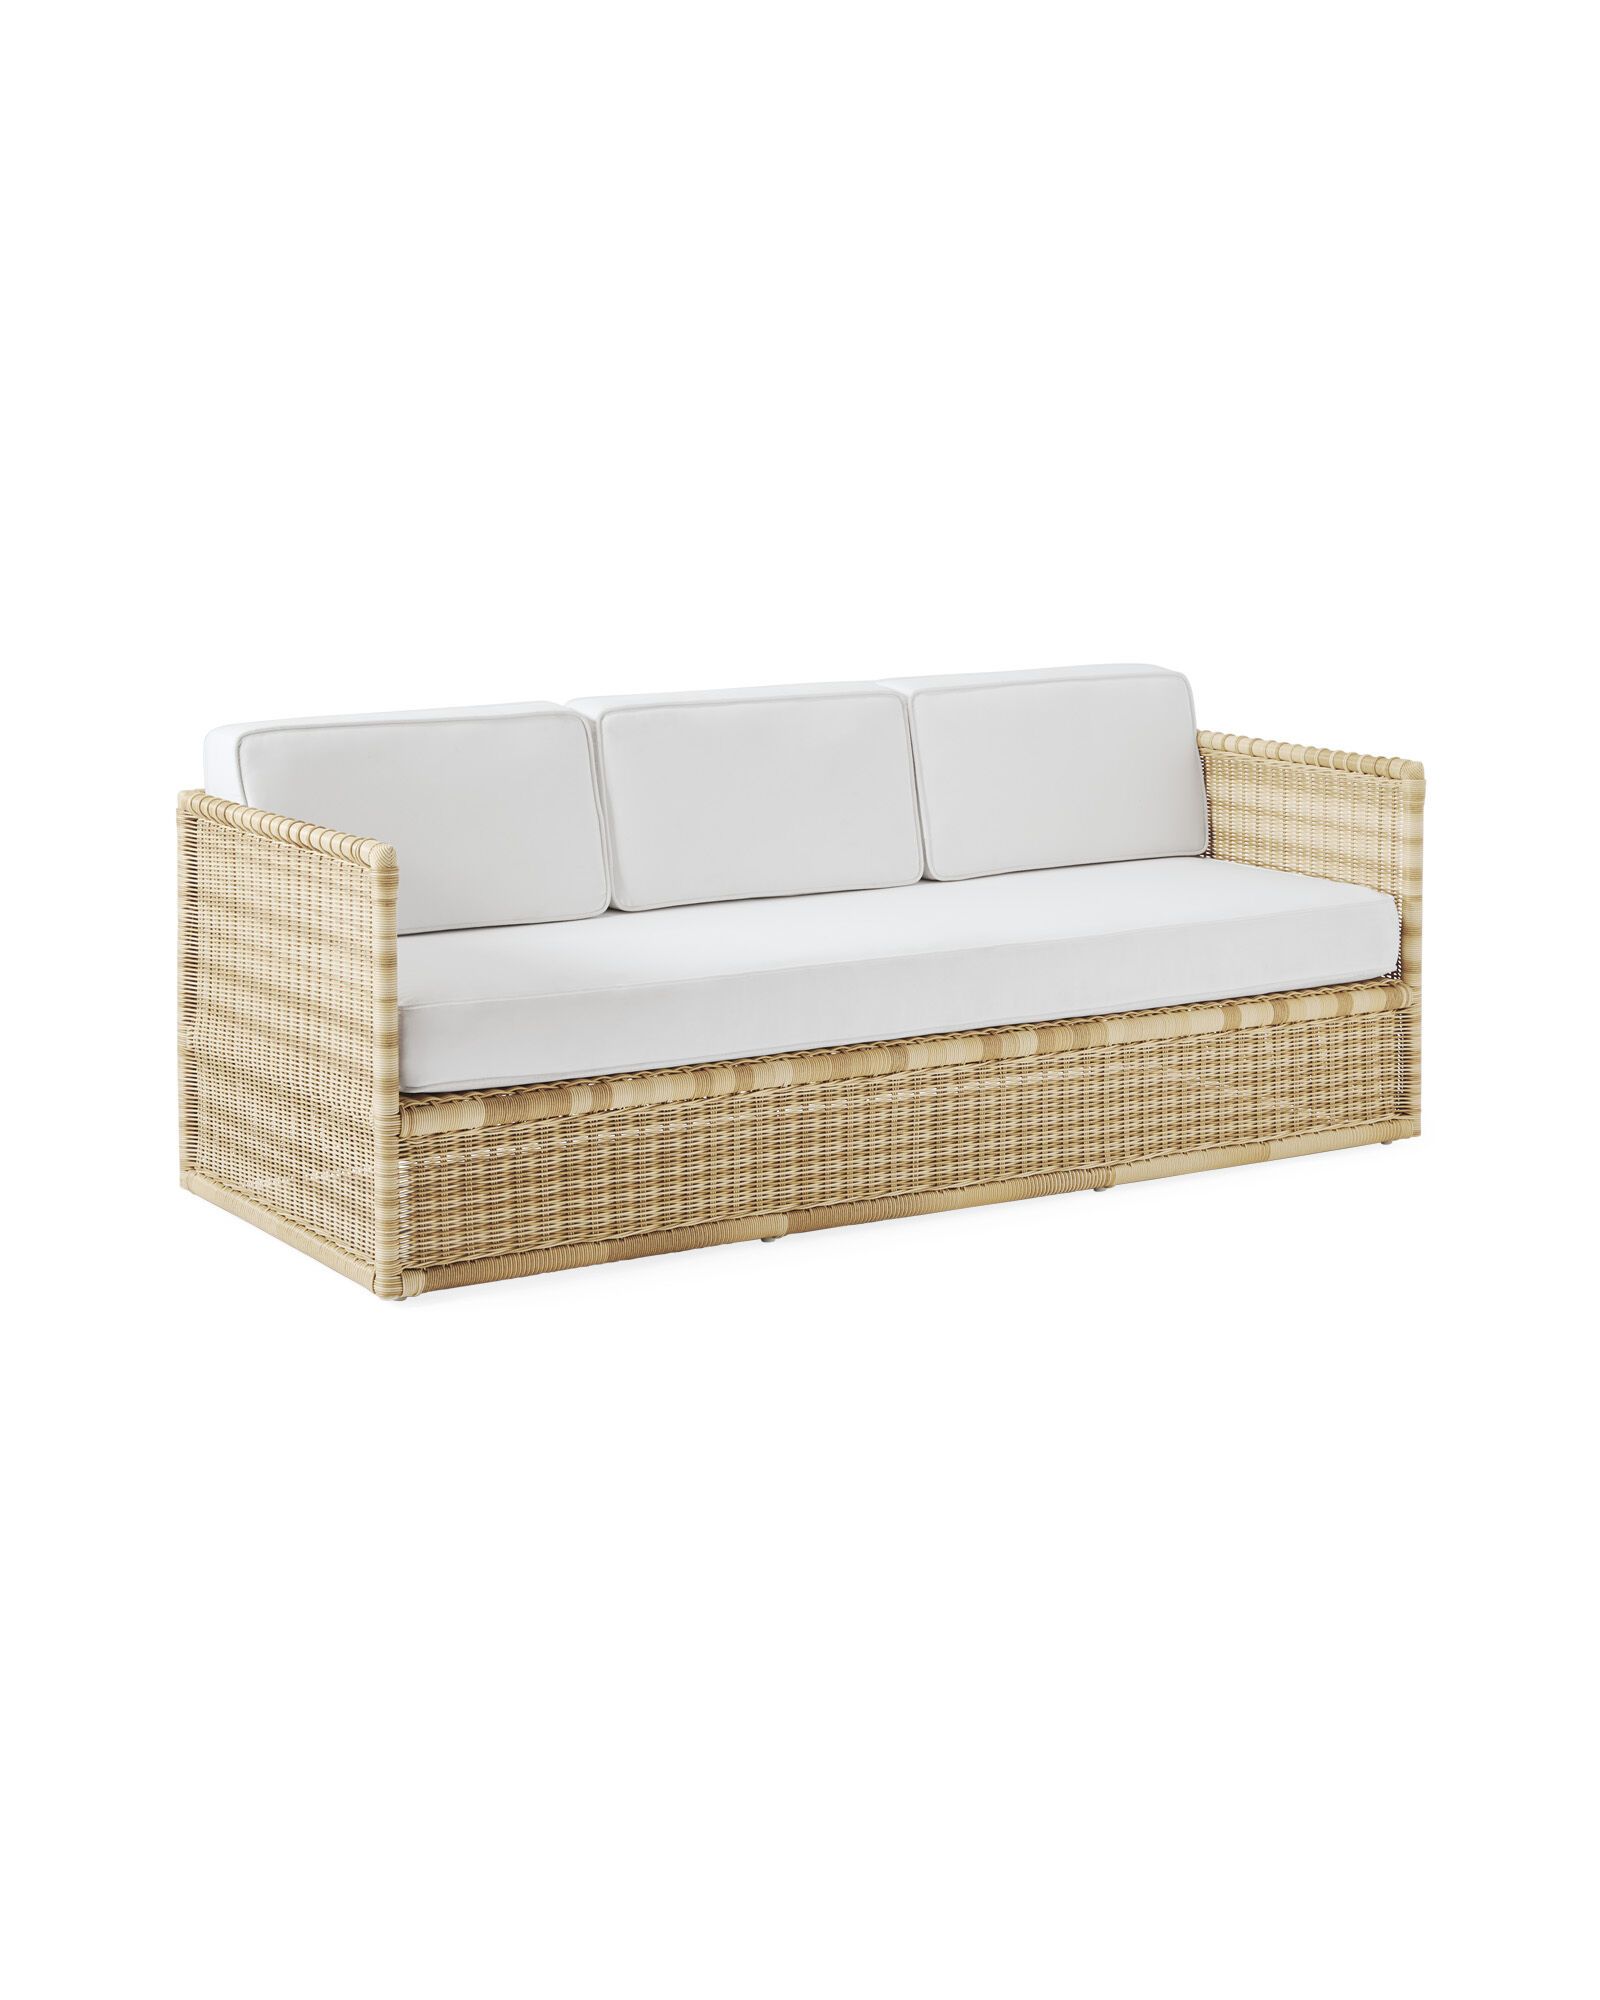 Pacifica Sofa - Light Dune | Serena and Lily